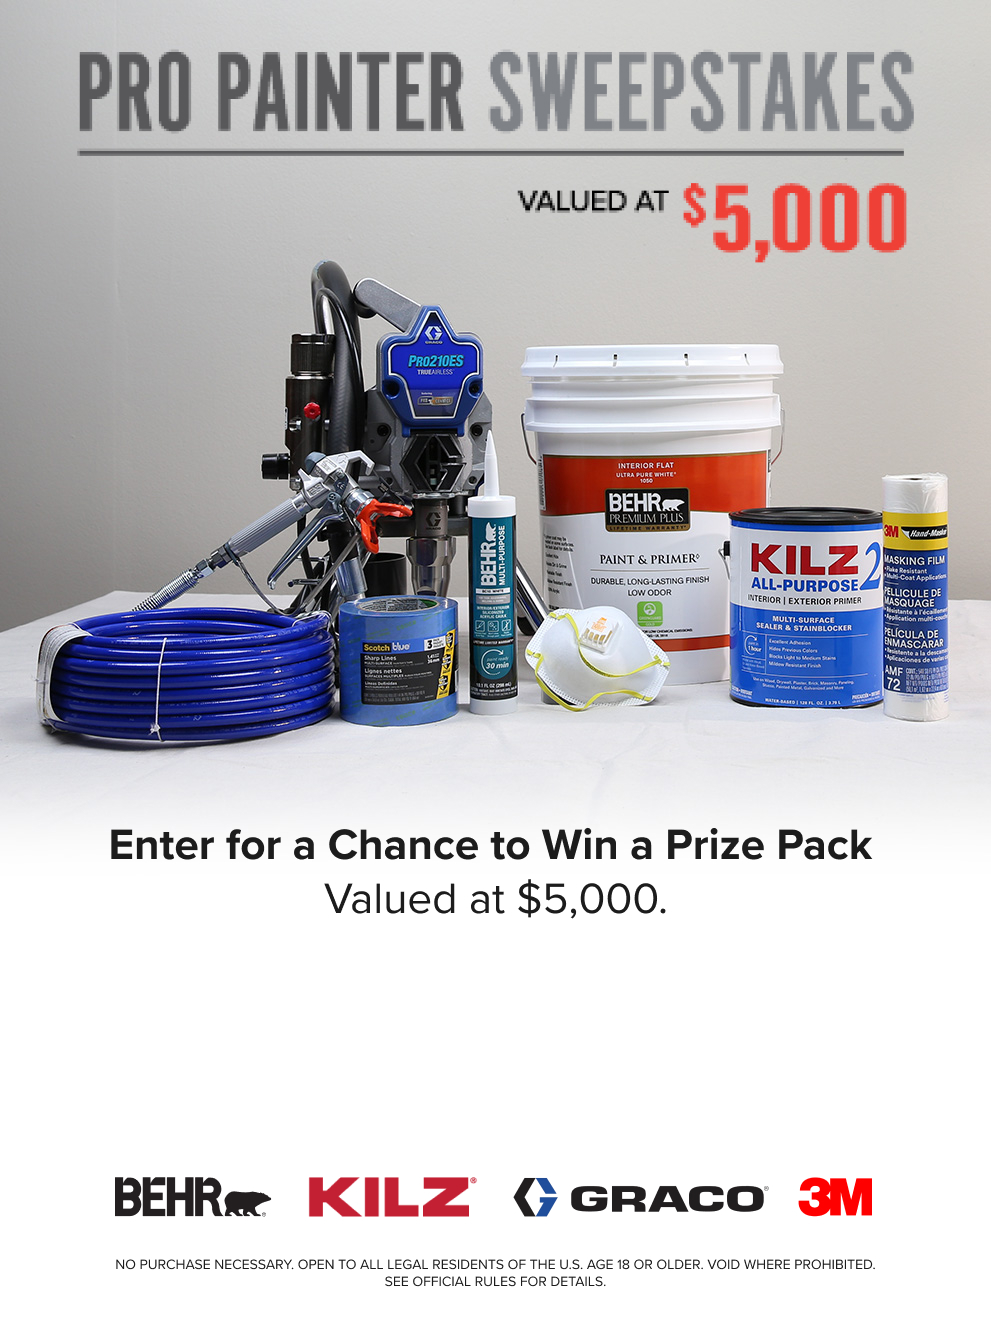 Enter for a Chance to Win a Prize Pack Valued at $5,000